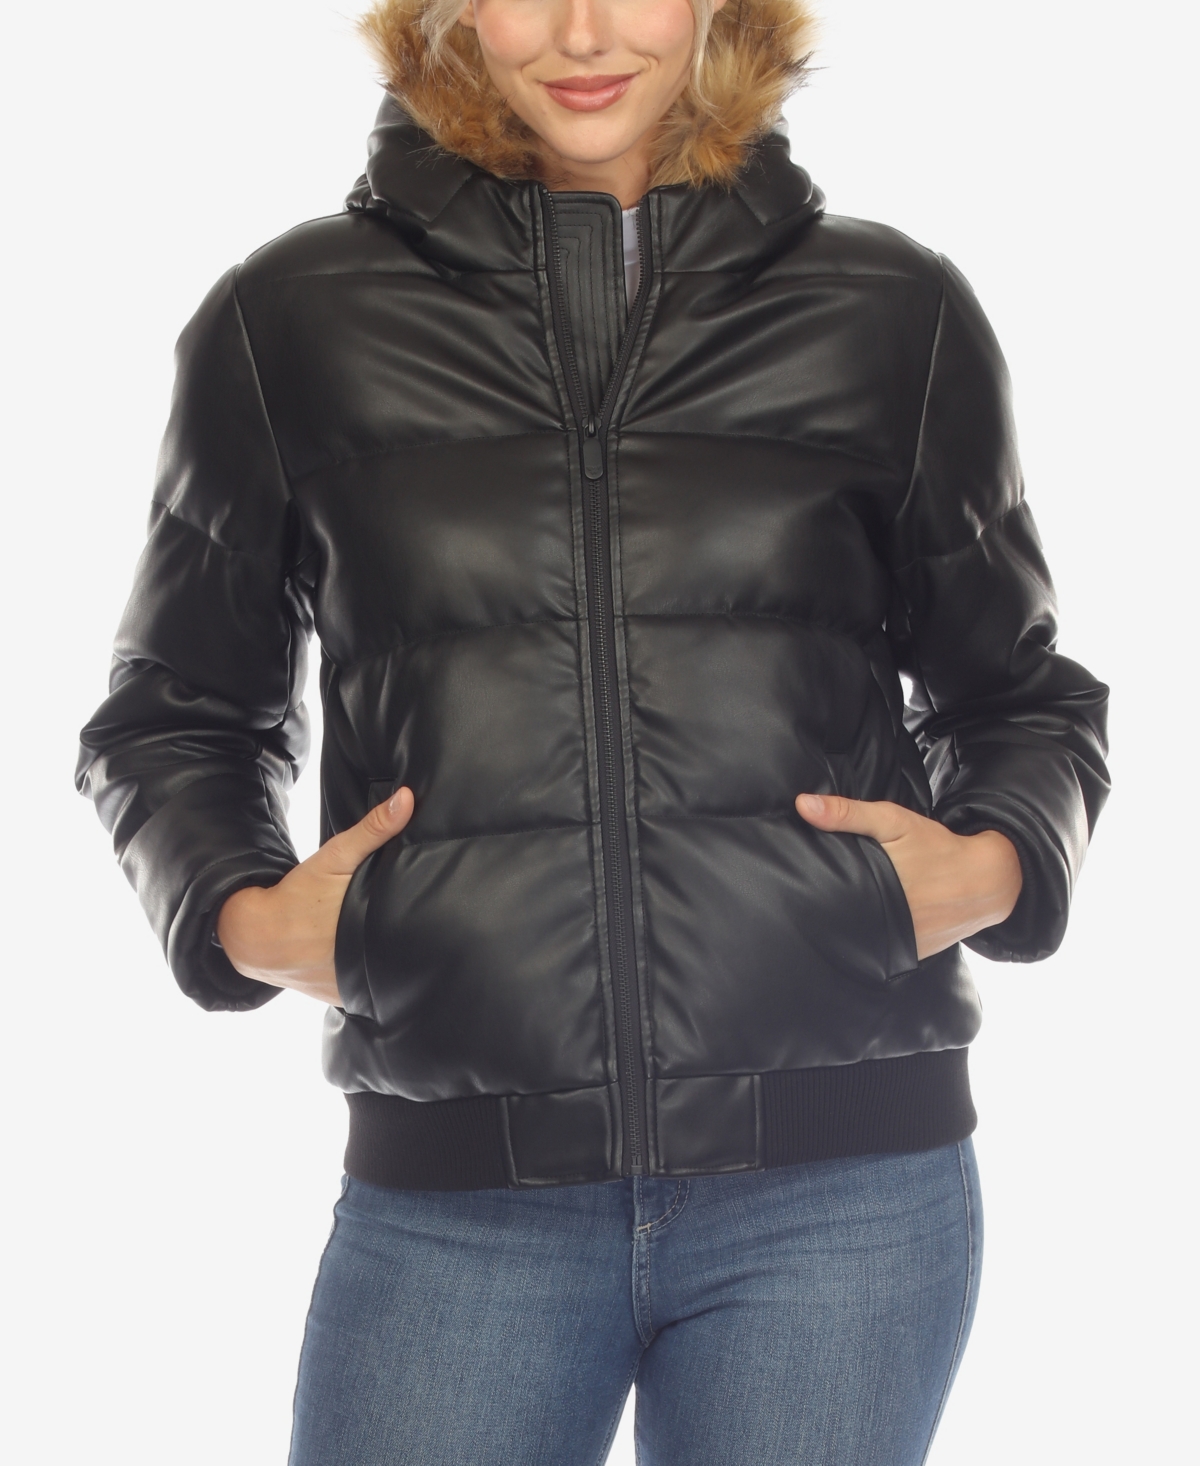 Women's Removable Furry Hoodie Bomber Leather Jacket - Black